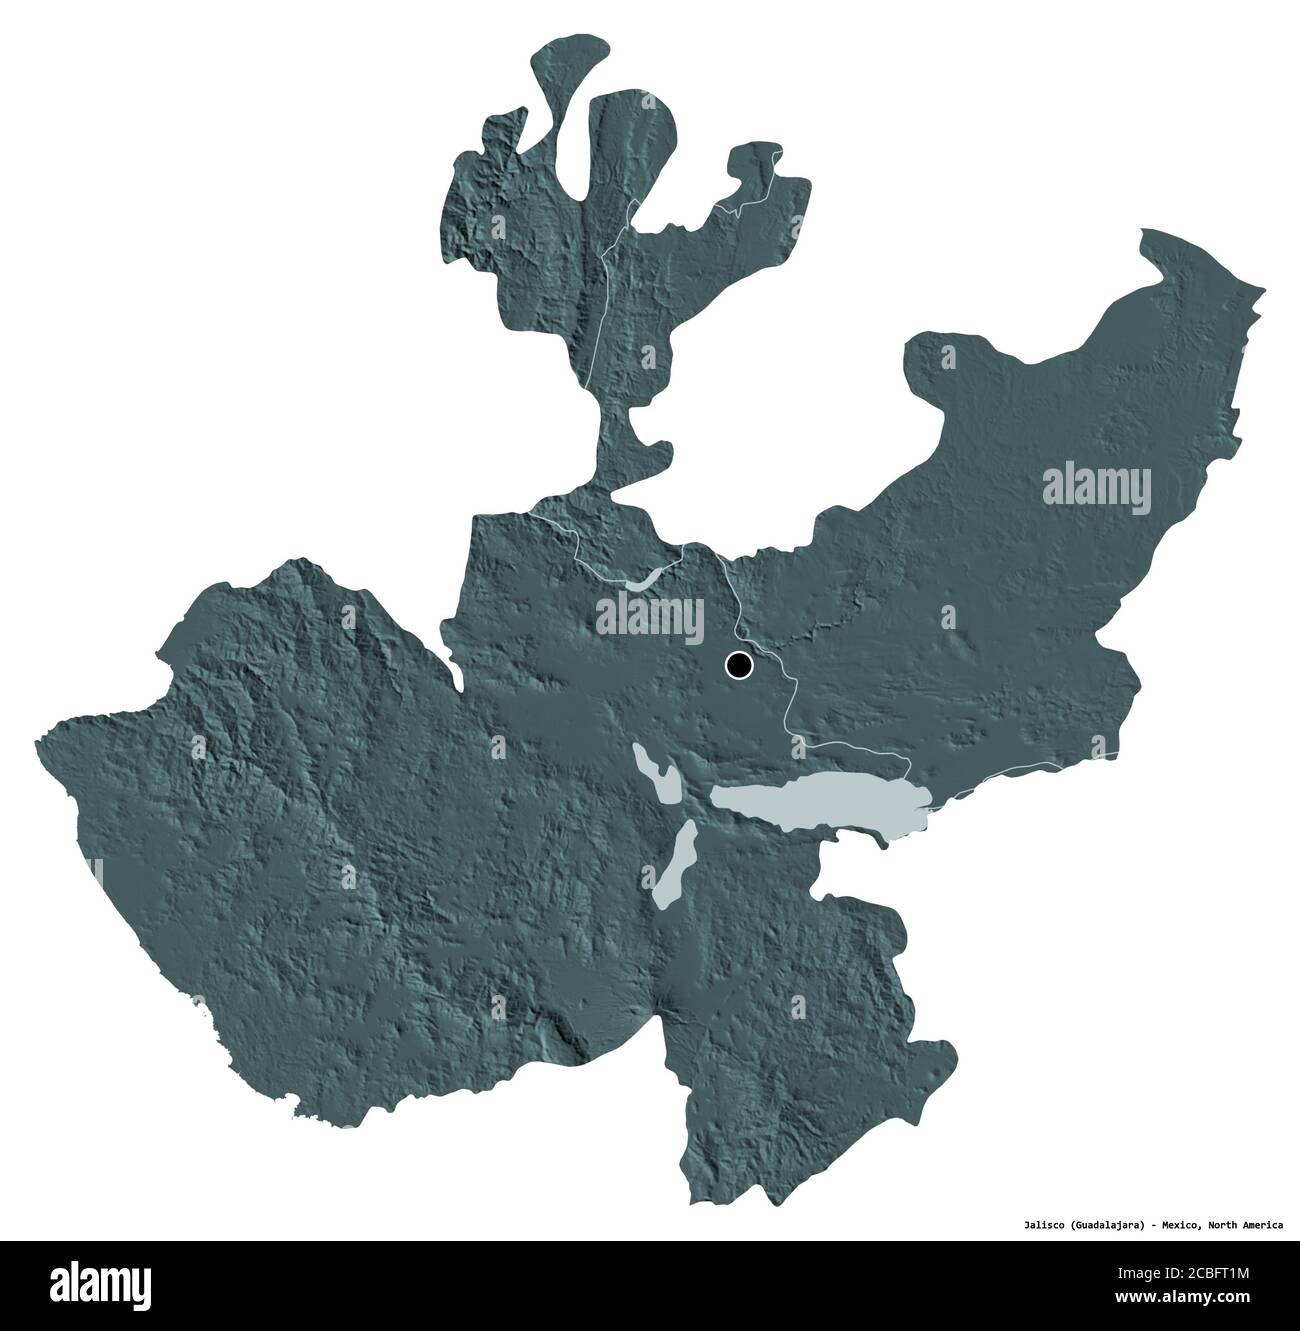 Shape of Jalisco, state of Mexico, with its capital isolated on white background. Colored elevation map. 3D rendering Stock Photo